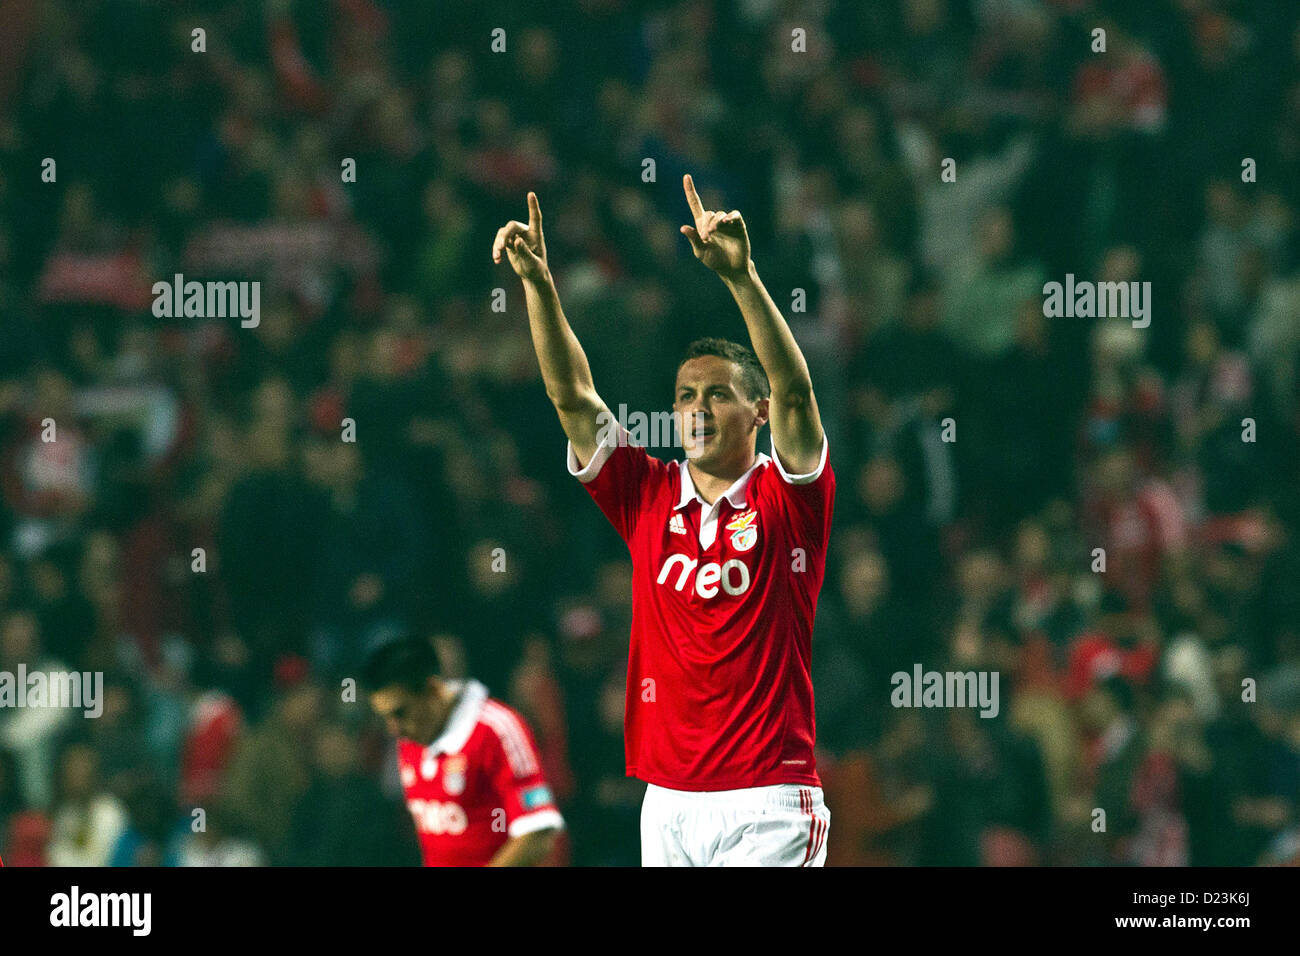 13.01.2013.  Lisbon, Portugal - Nemanja Matic SL Benfica midfielder celebrating his goal during the football derby between Benfica and FC Porto in round 14 of the Portuguese Zon Sagres League, at Benfica's Luz Stadium in Lisbon Stock Photo